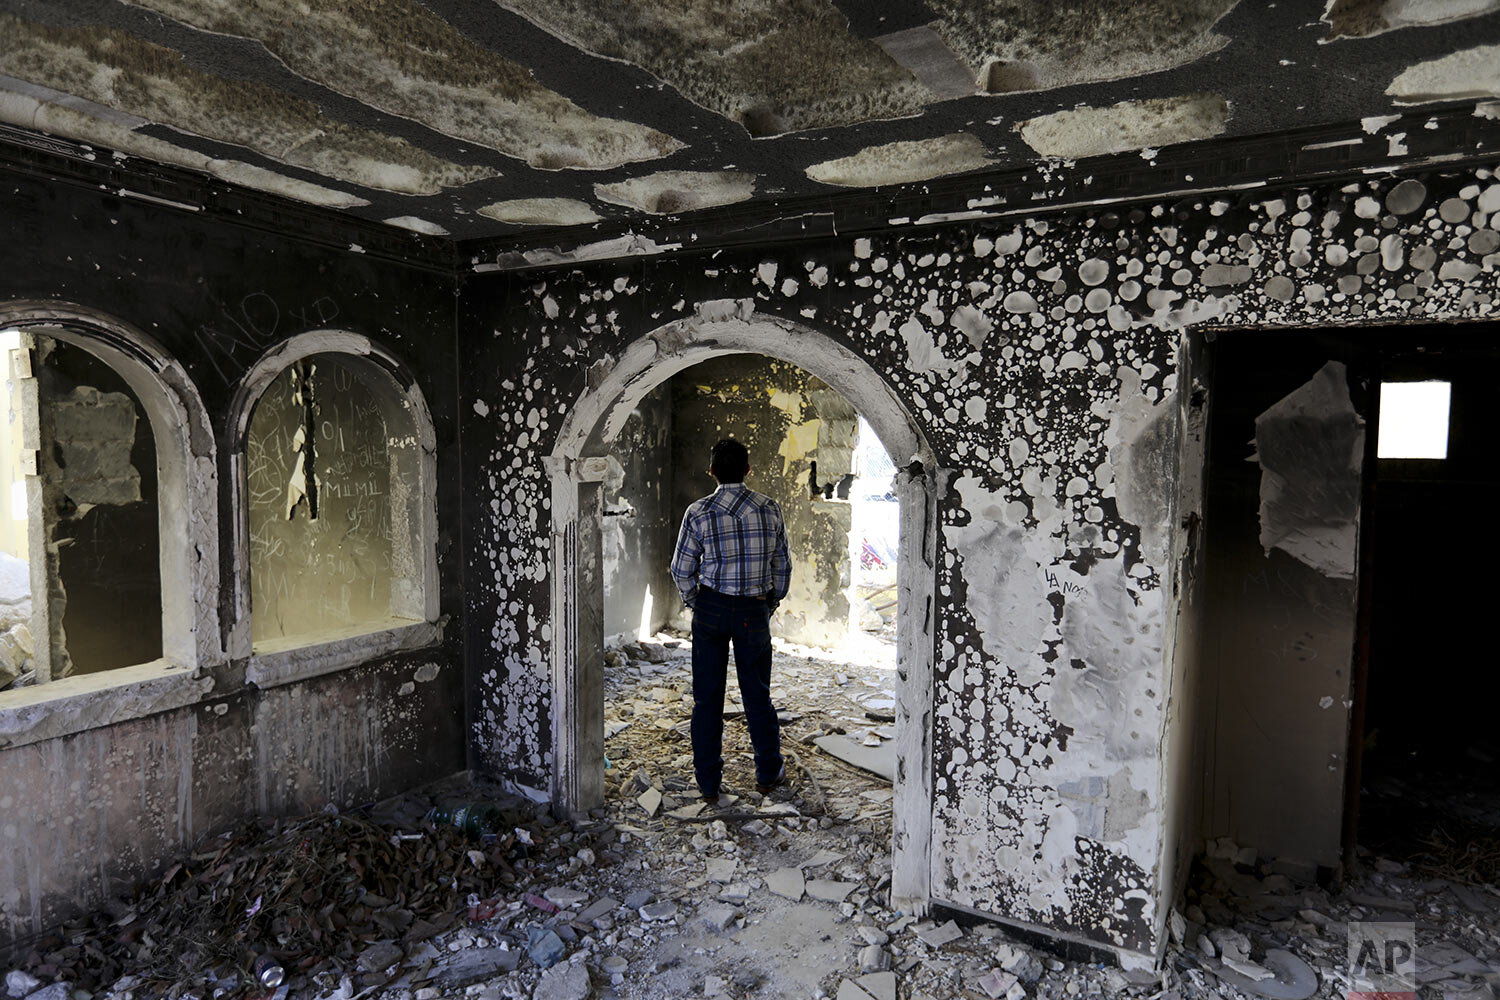  A former policeman walks through an abandoned home, torched by the Zetas cartel eight years ago in Allende, Coahuila state, Mexico, Dec. 3, 2019. In an act of revenge cartel members in 2011 razed and burned houses and disappeared people just by bear